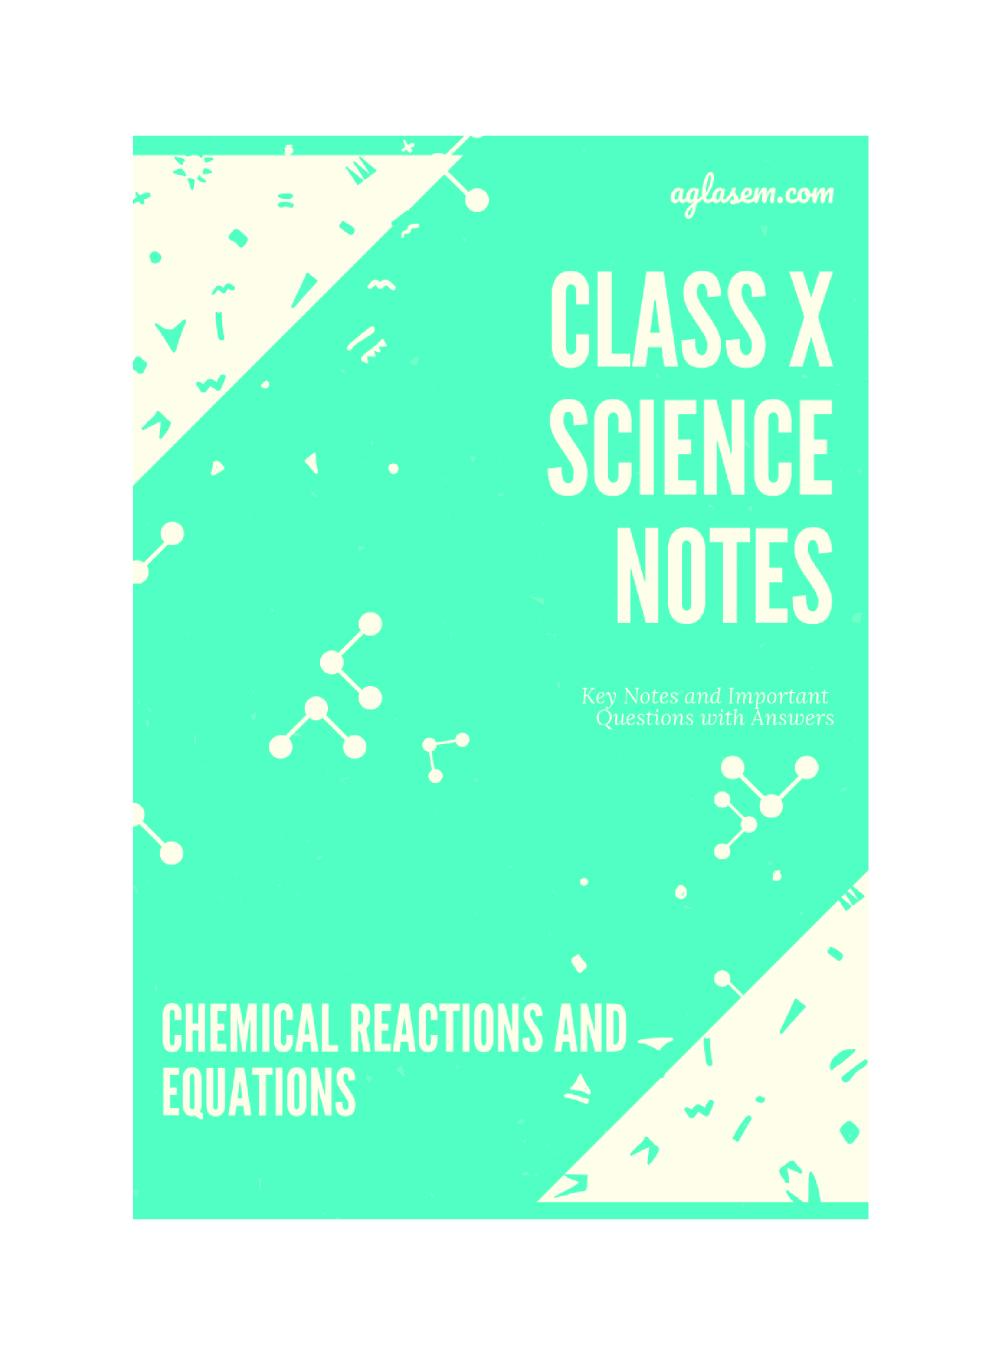 Class 10 Science Notes for Chemical Reactions and Equations - Page 1